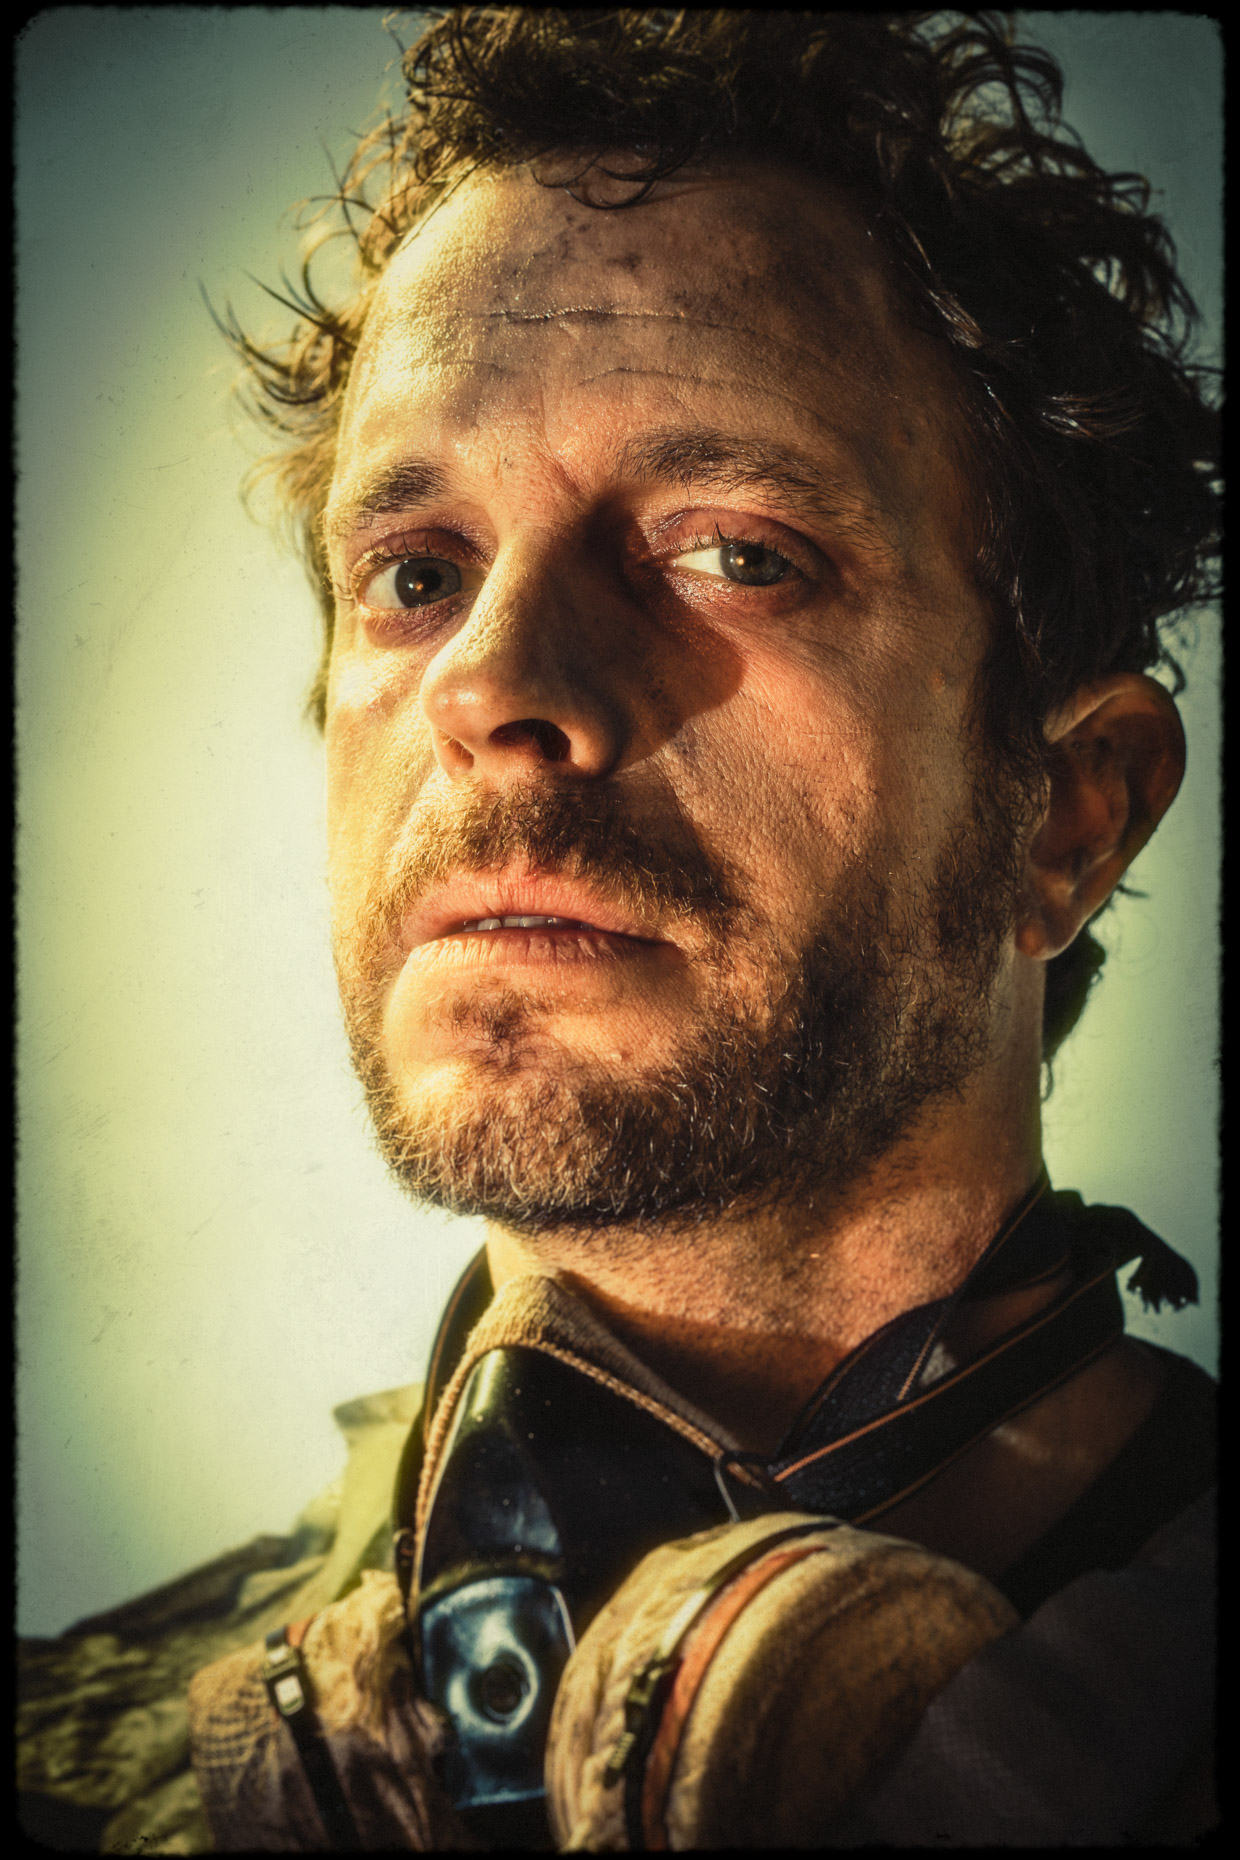 Character Portrait of actor Jed Arkley as Zeb, one of 9 main characters. Introducing the apocalyptic world of the Bad Choices Project, a cinematic visual screenplay and personal project by Andy Batt.